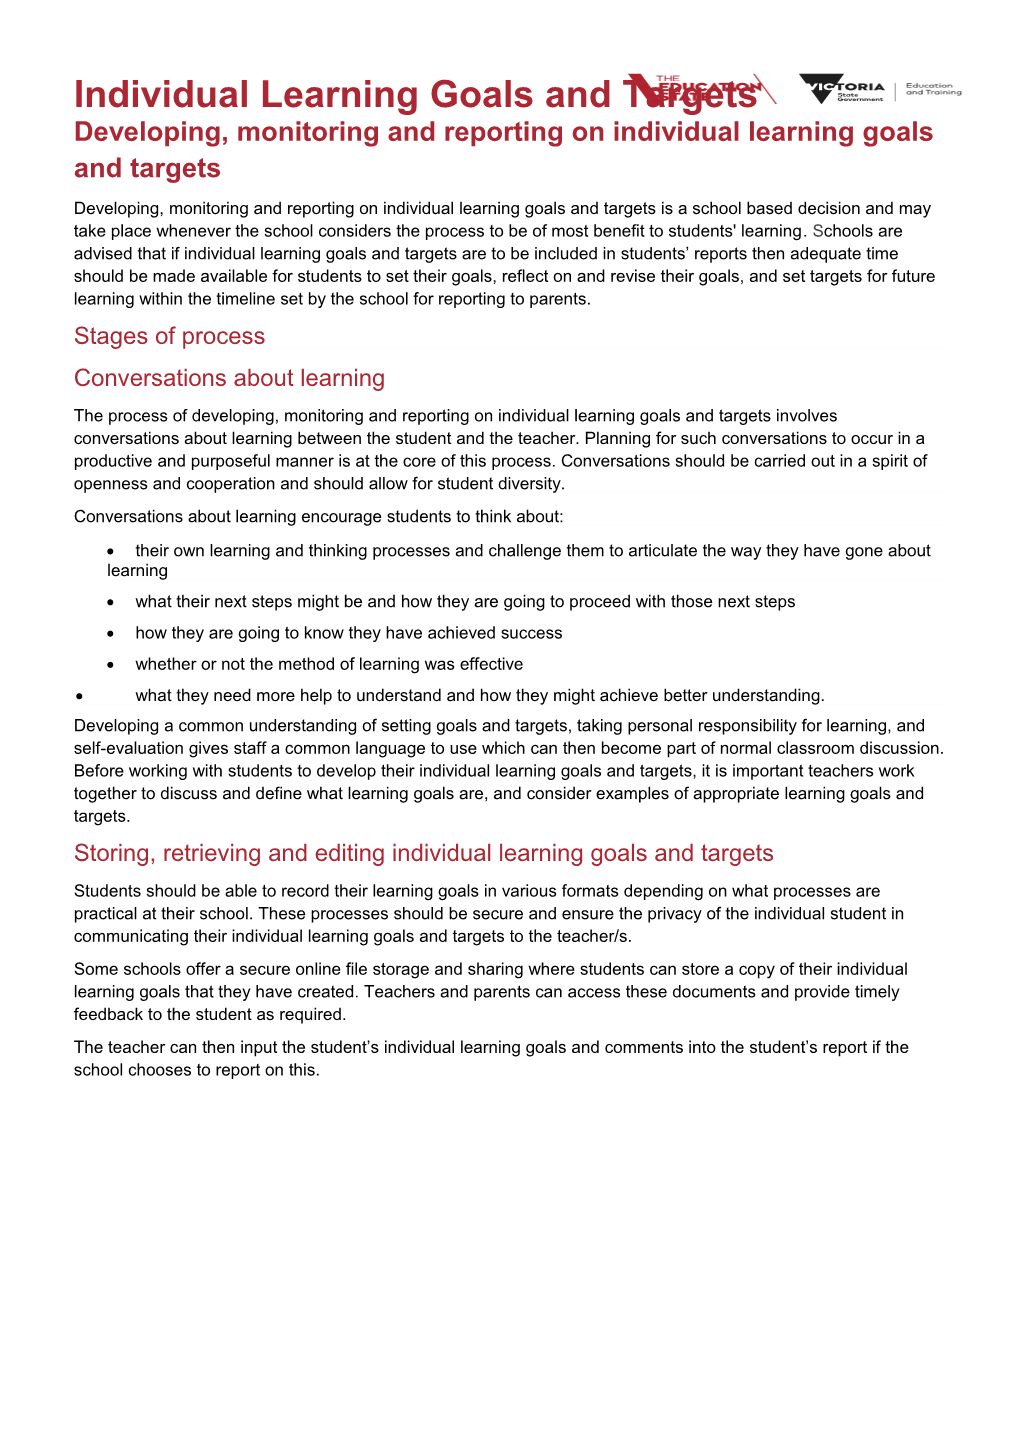 Individual Learning Goals and Targets